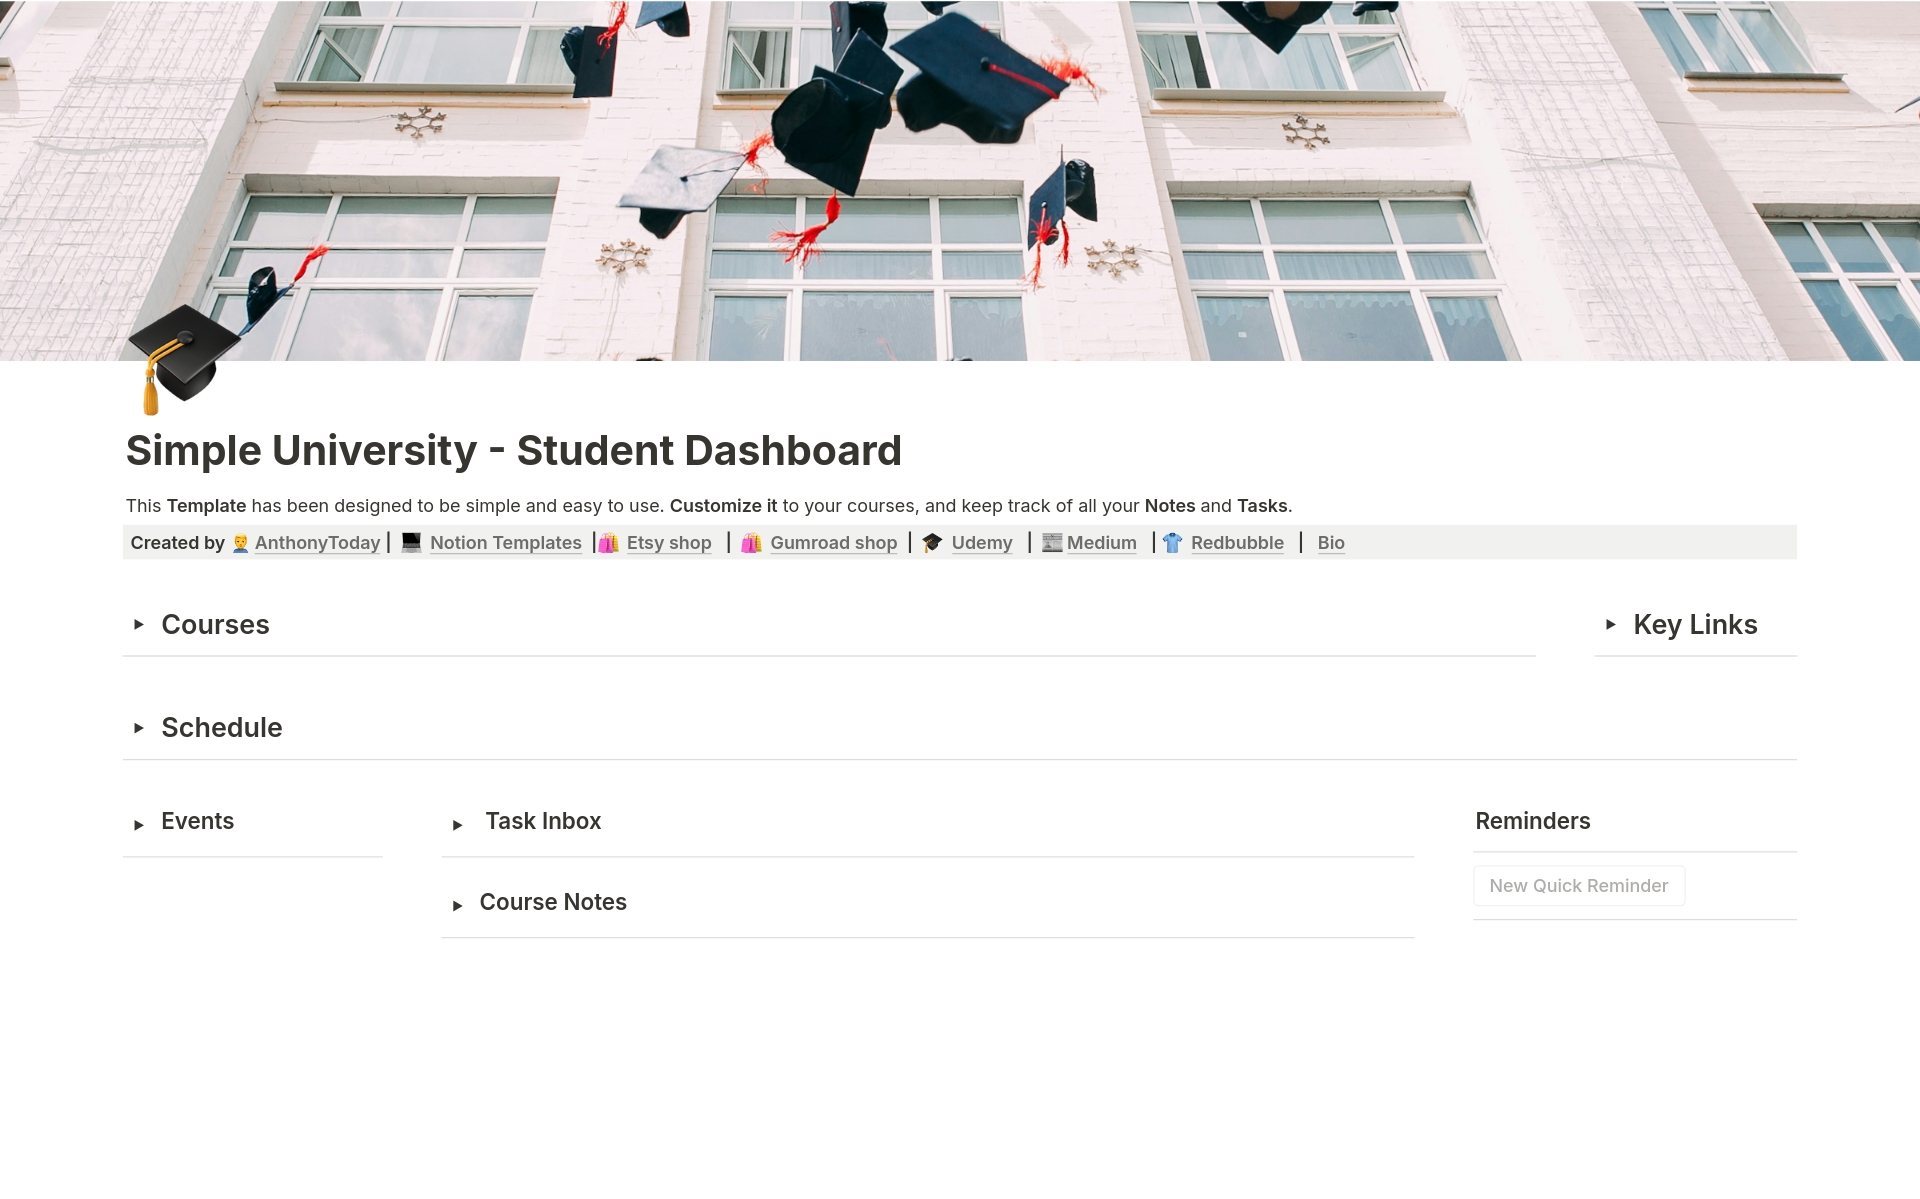 This Simple University Student Dashboard gives you quick access to a simple and easy-to-use template to organize your courses, notes, and tasks. 

Easy to customize to your courses.

FREE to Duplicate, customize, and enjoy it!